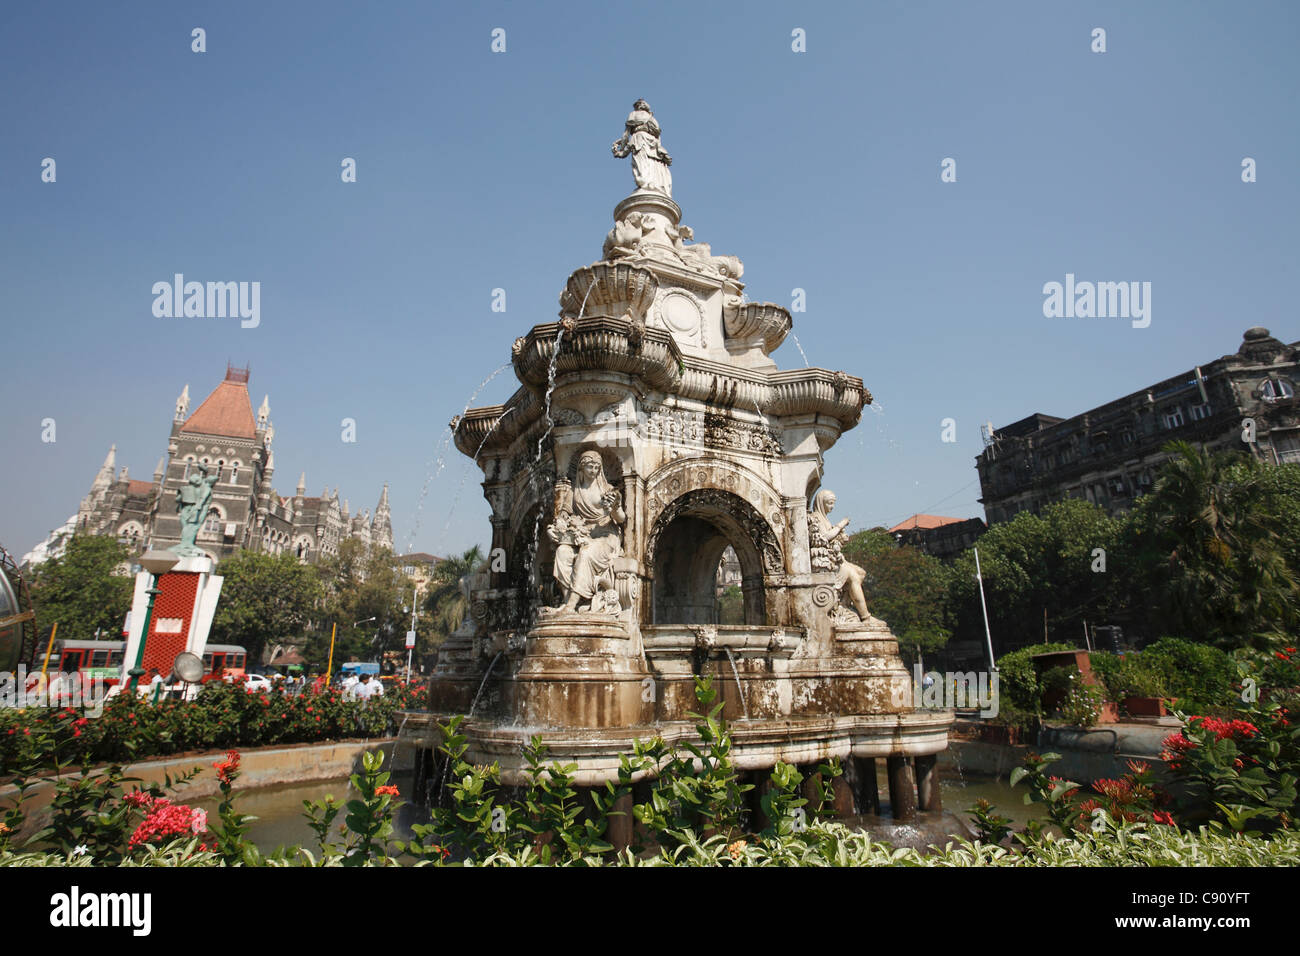 Flora Fountain is a stone fountain in Fort business district built in 1864. The fountain depicts the Roman goddess Flora. It is Stock Photo